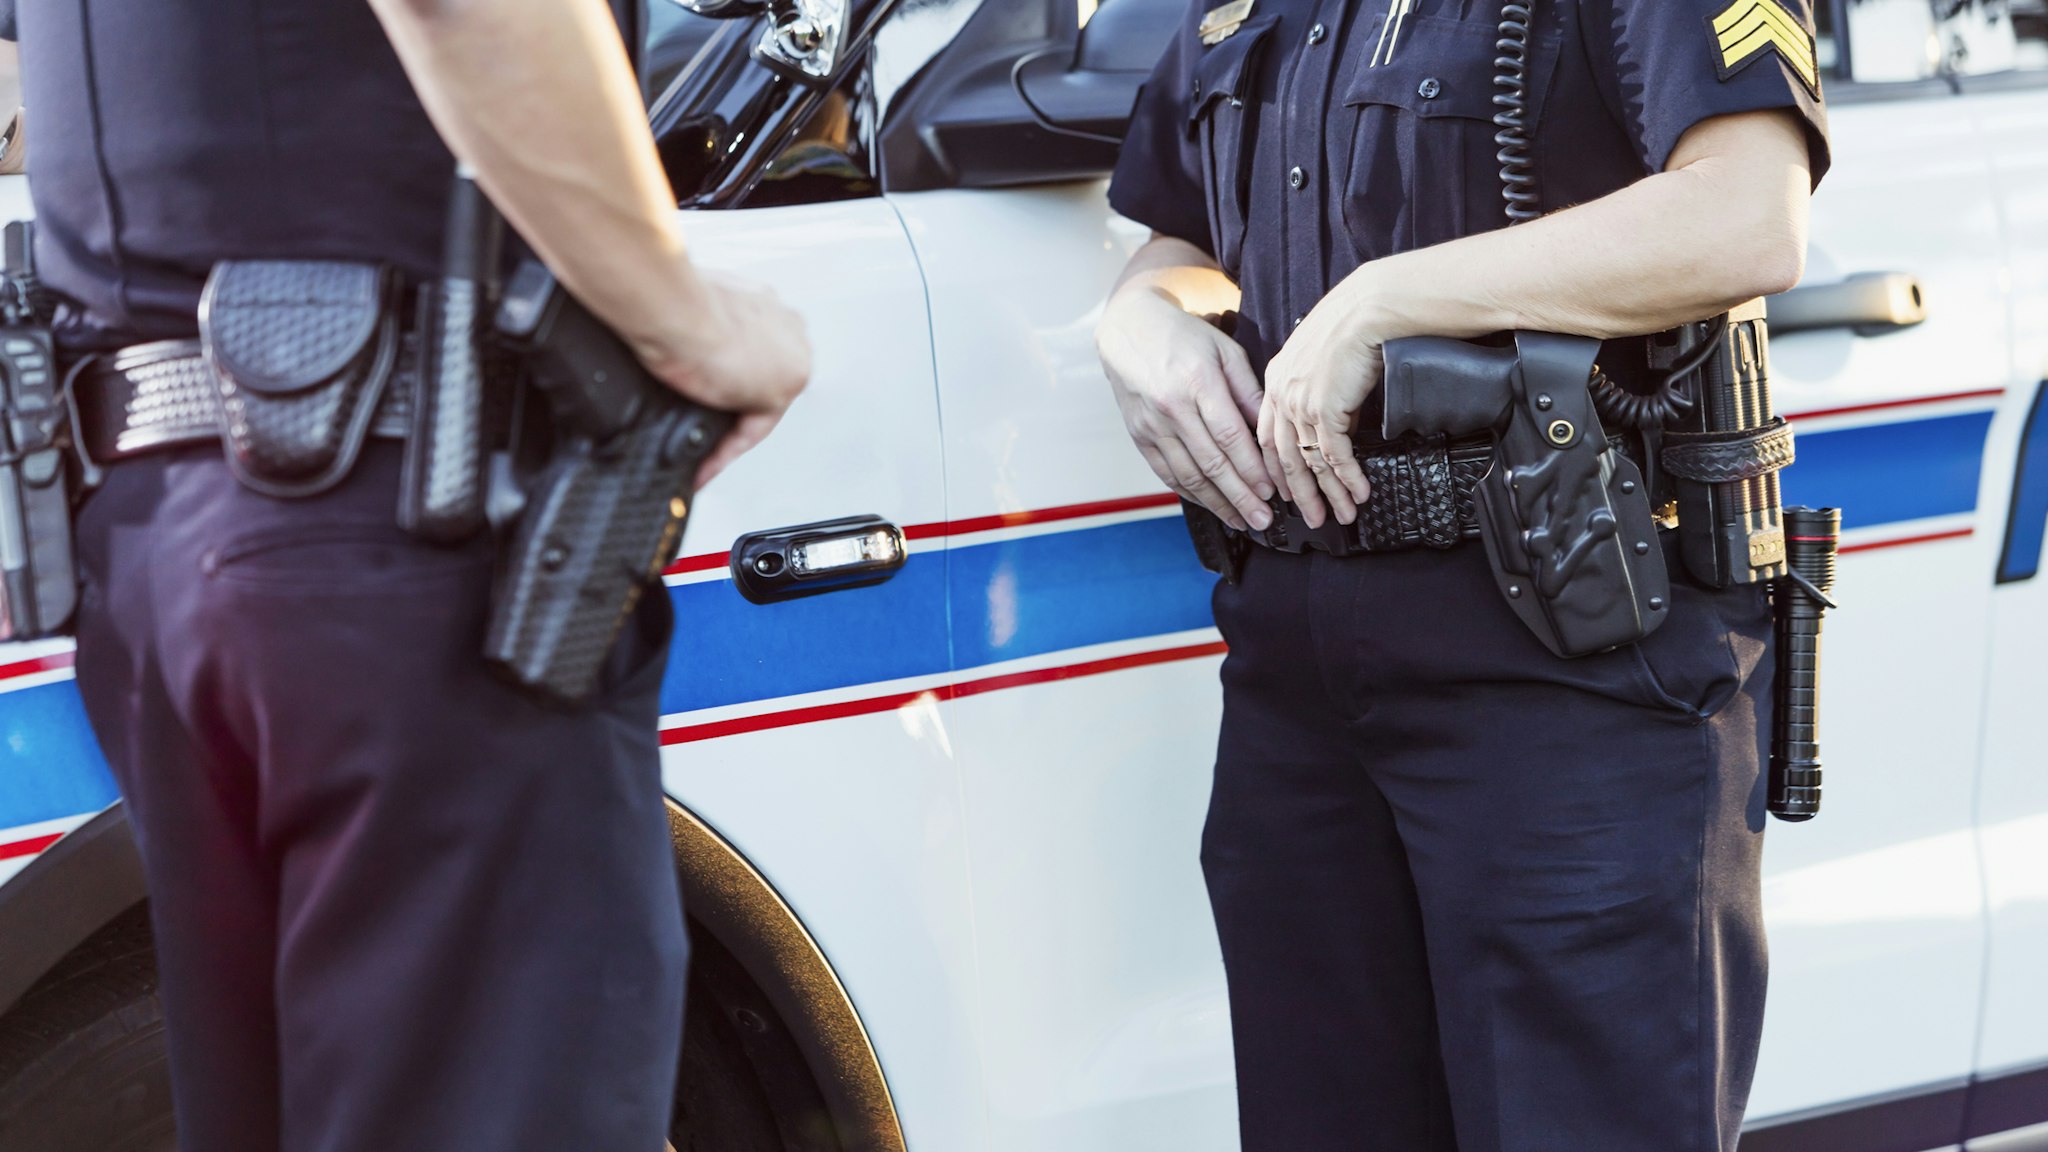 Cropped view of police officers standing beside a squad car having a conversation. The focus is on the policewoman whose hands are resting on her gun belt.